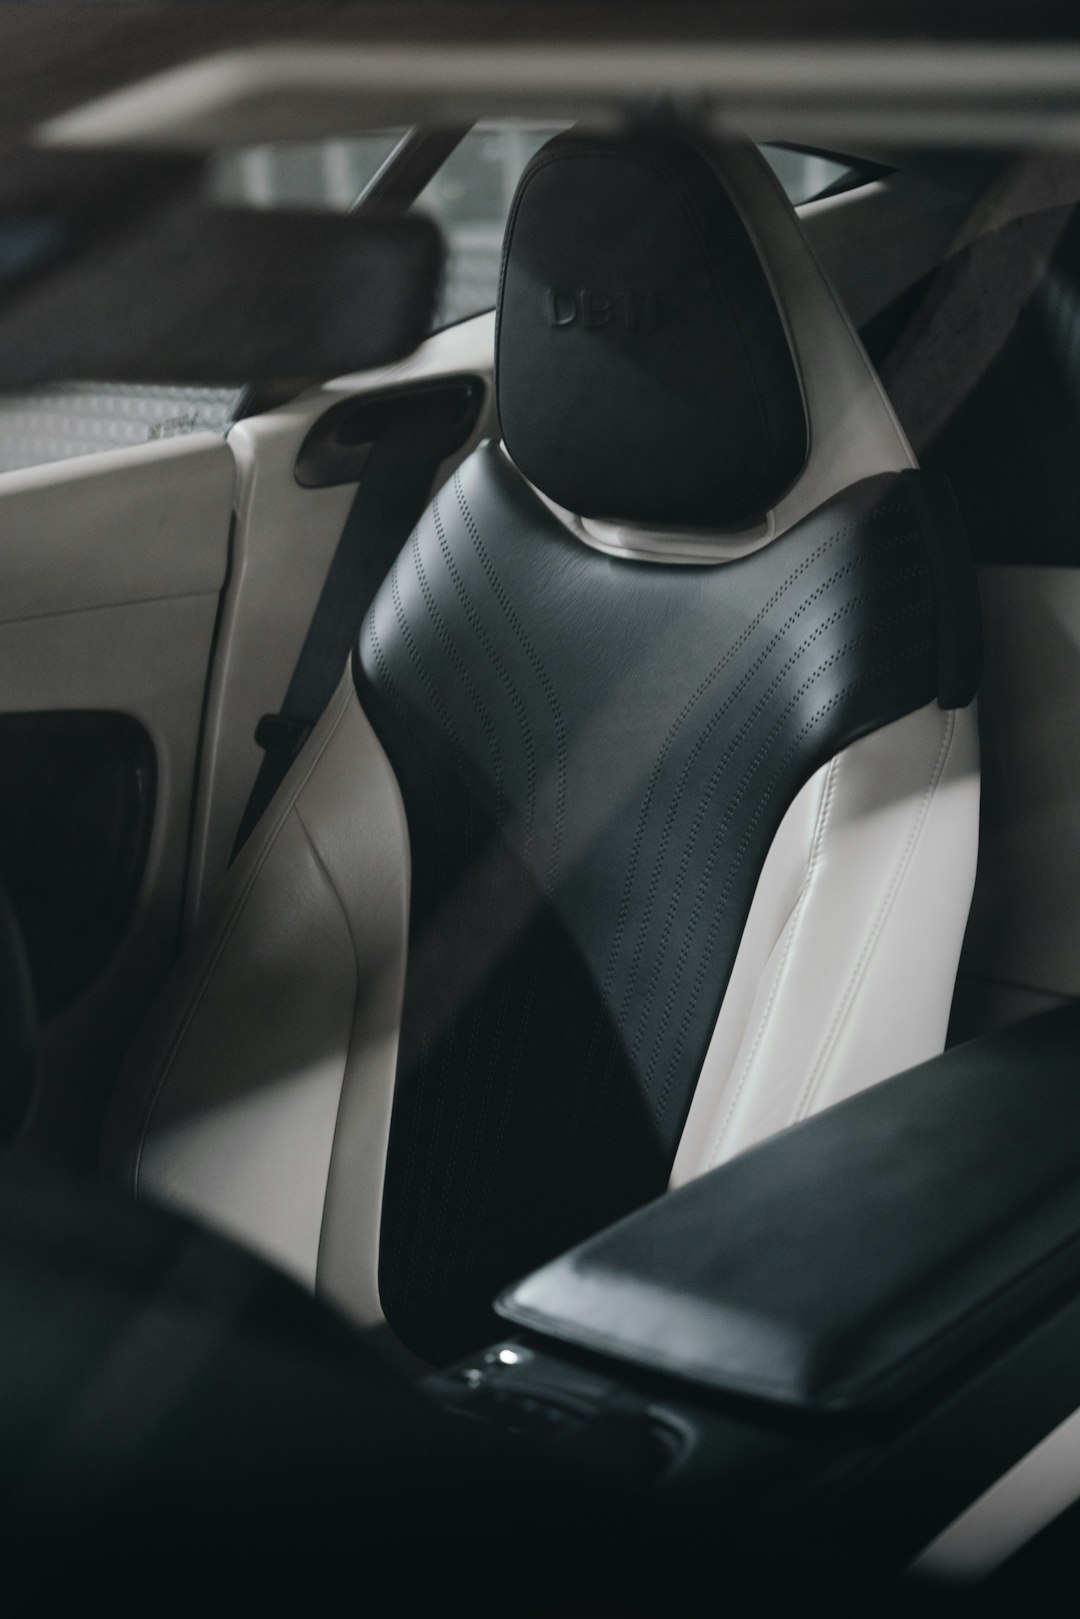 black and gray car seat